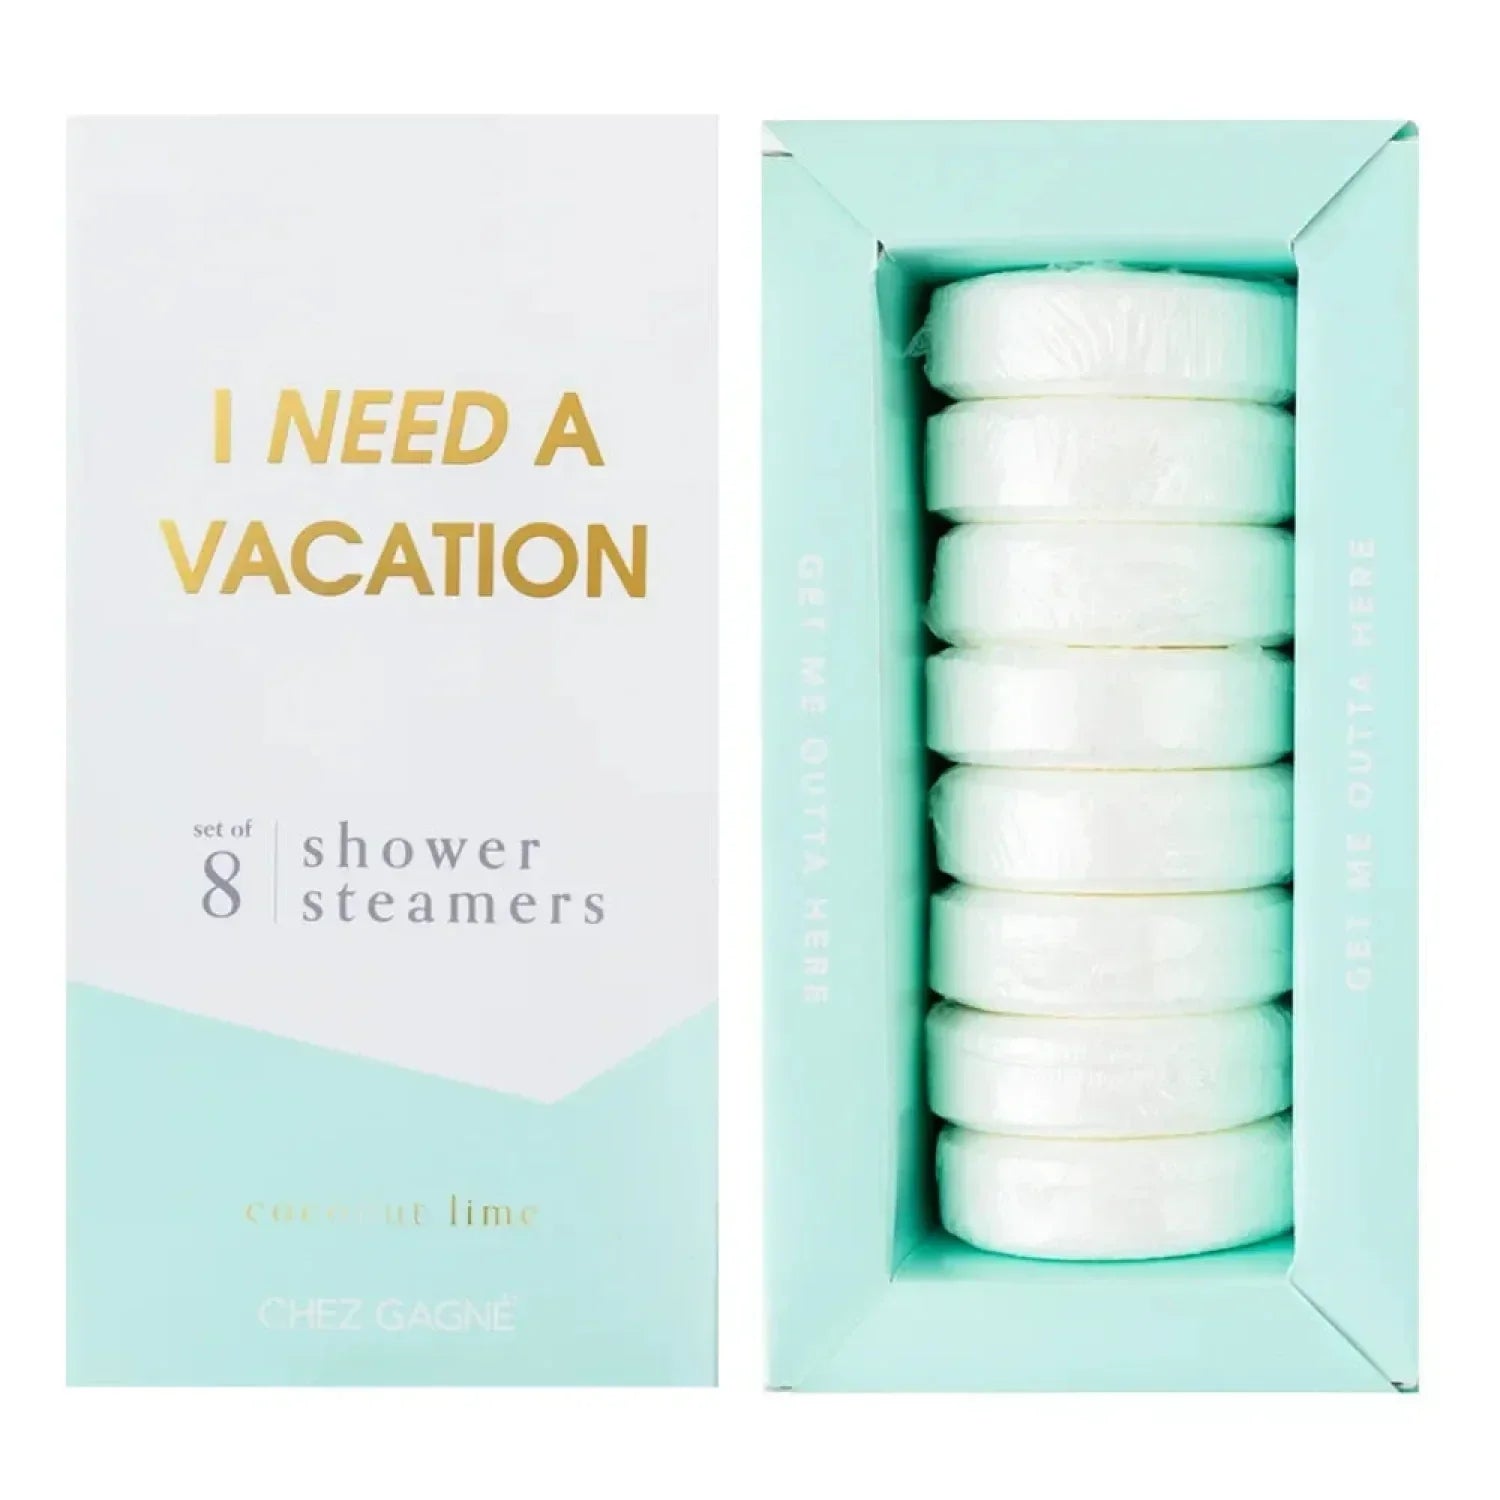 Chez Gagné 10. GIFTS|ACCESSORIES - GIFT - GIFT Shower Steamer NEED A VACATION